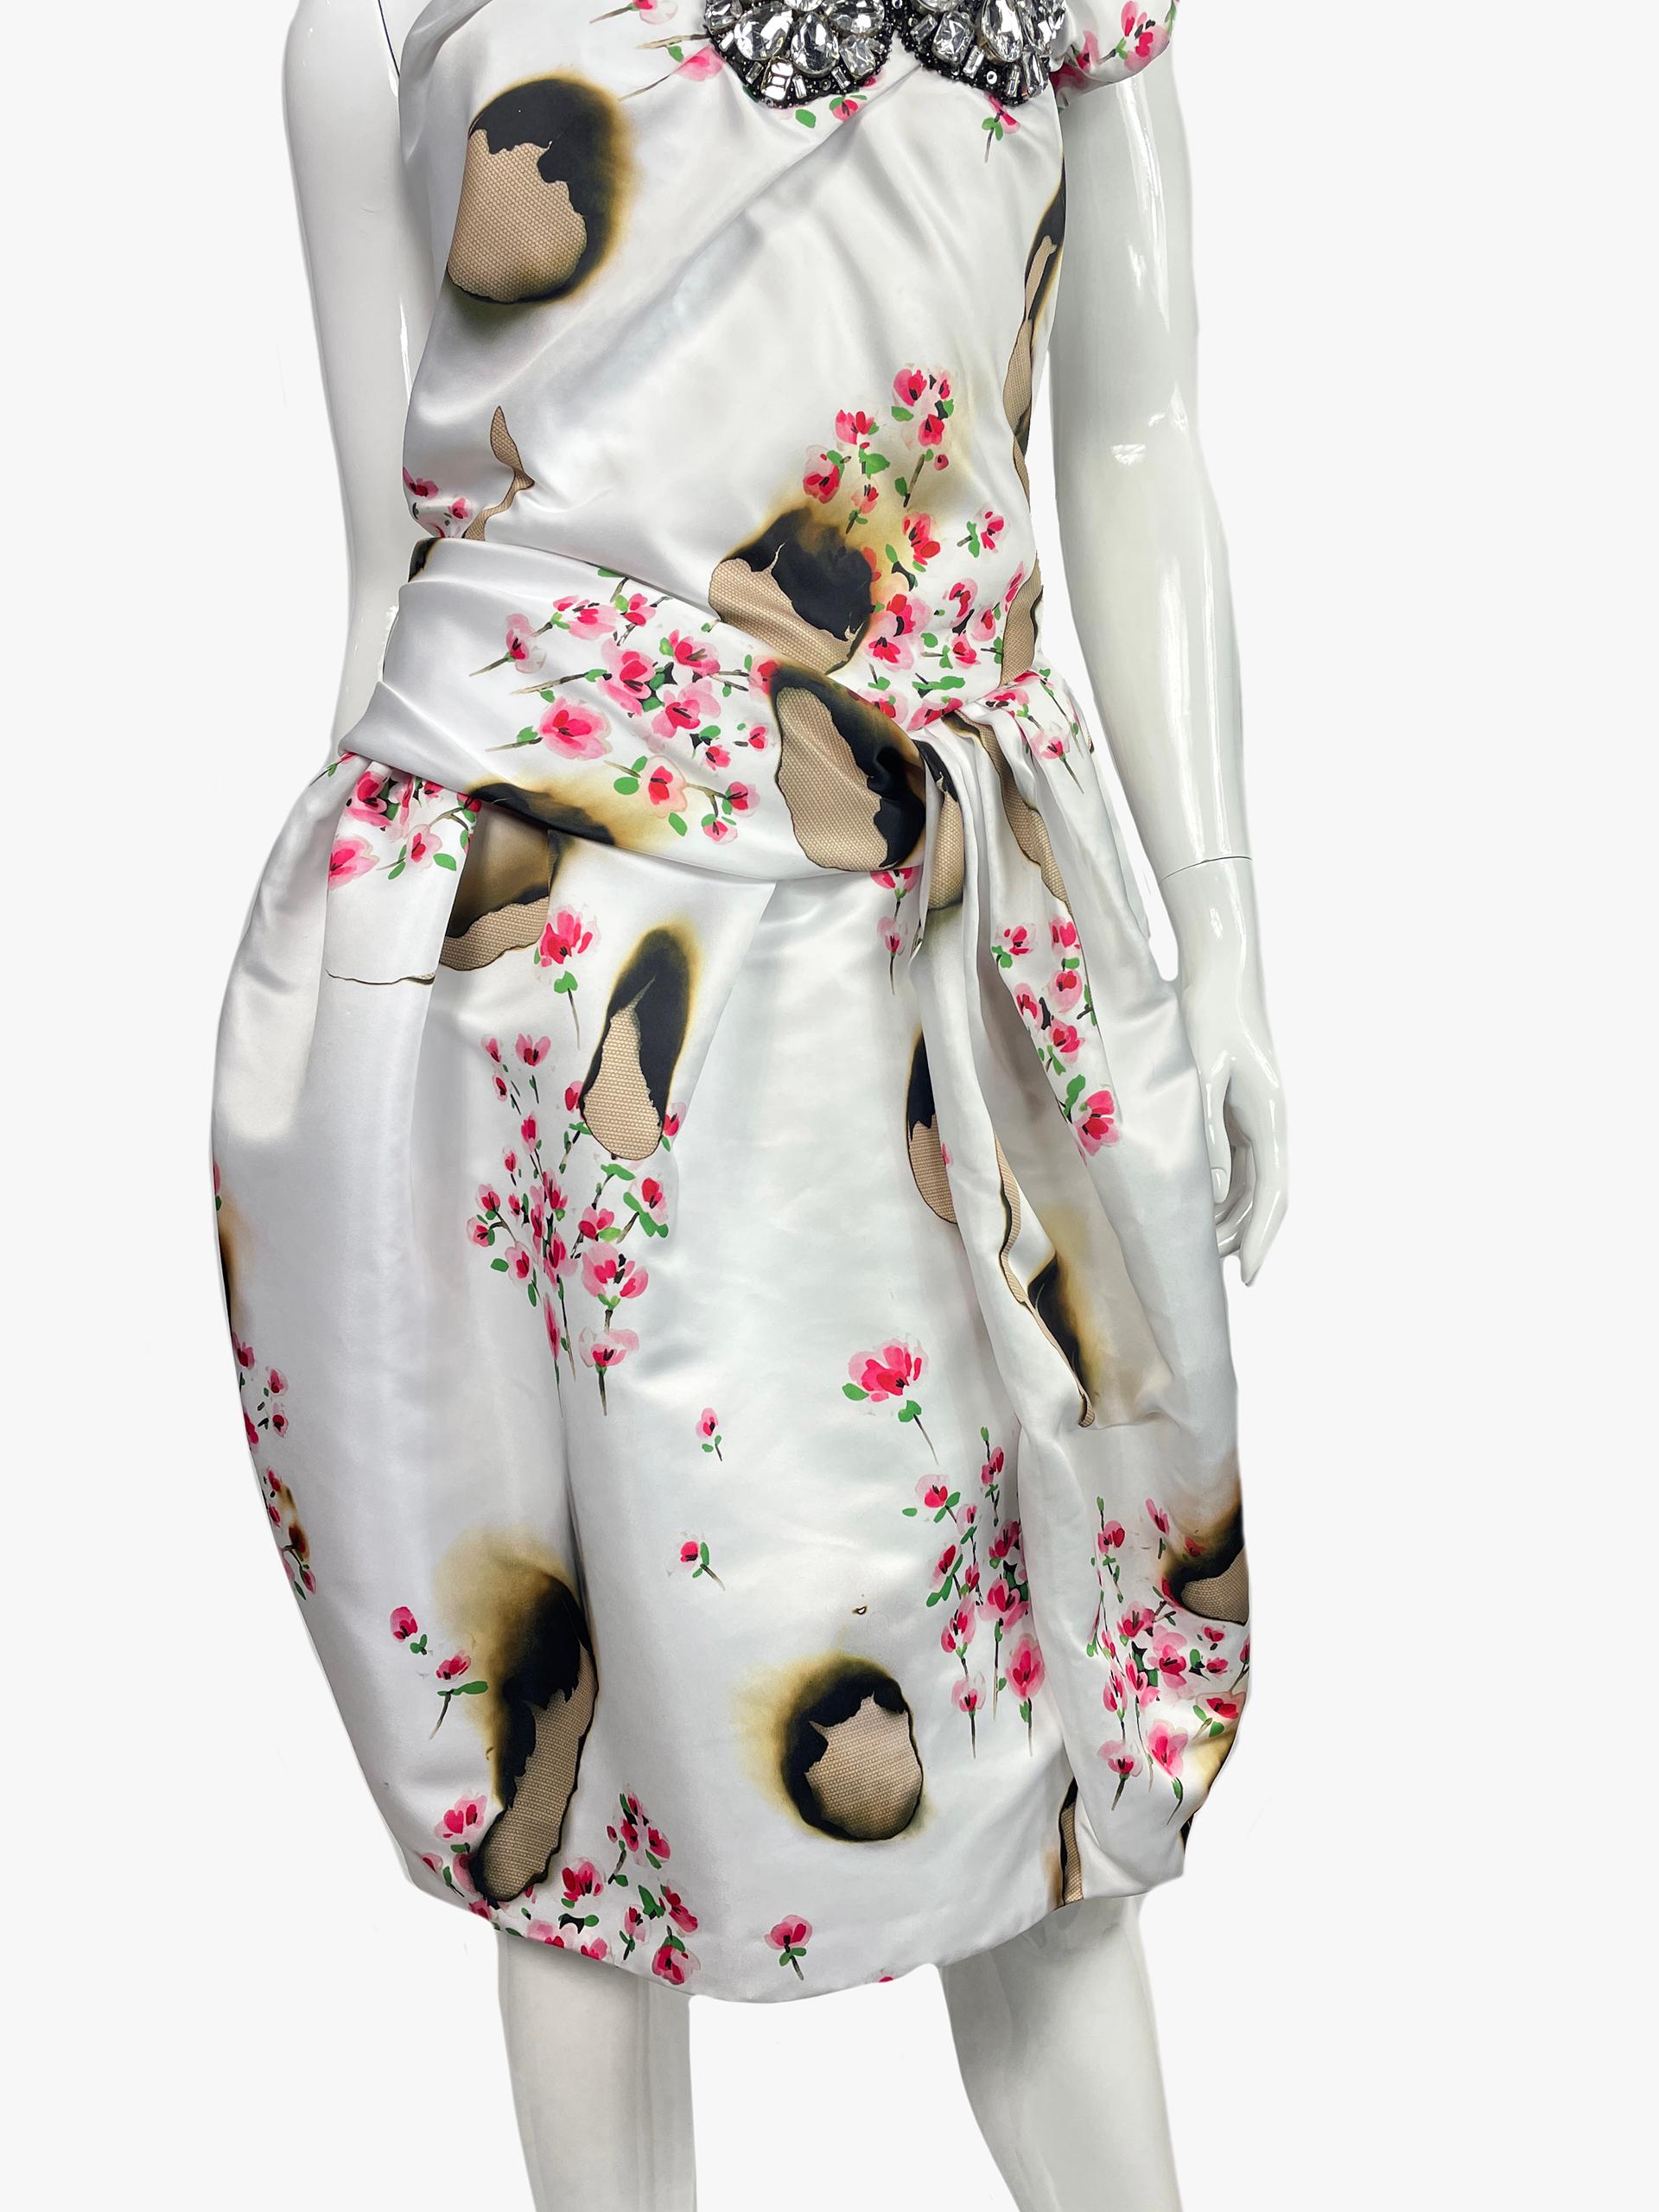 Moschino Couture Floral Print Dress, 2000s In Good Condition For Sale In New York, NY